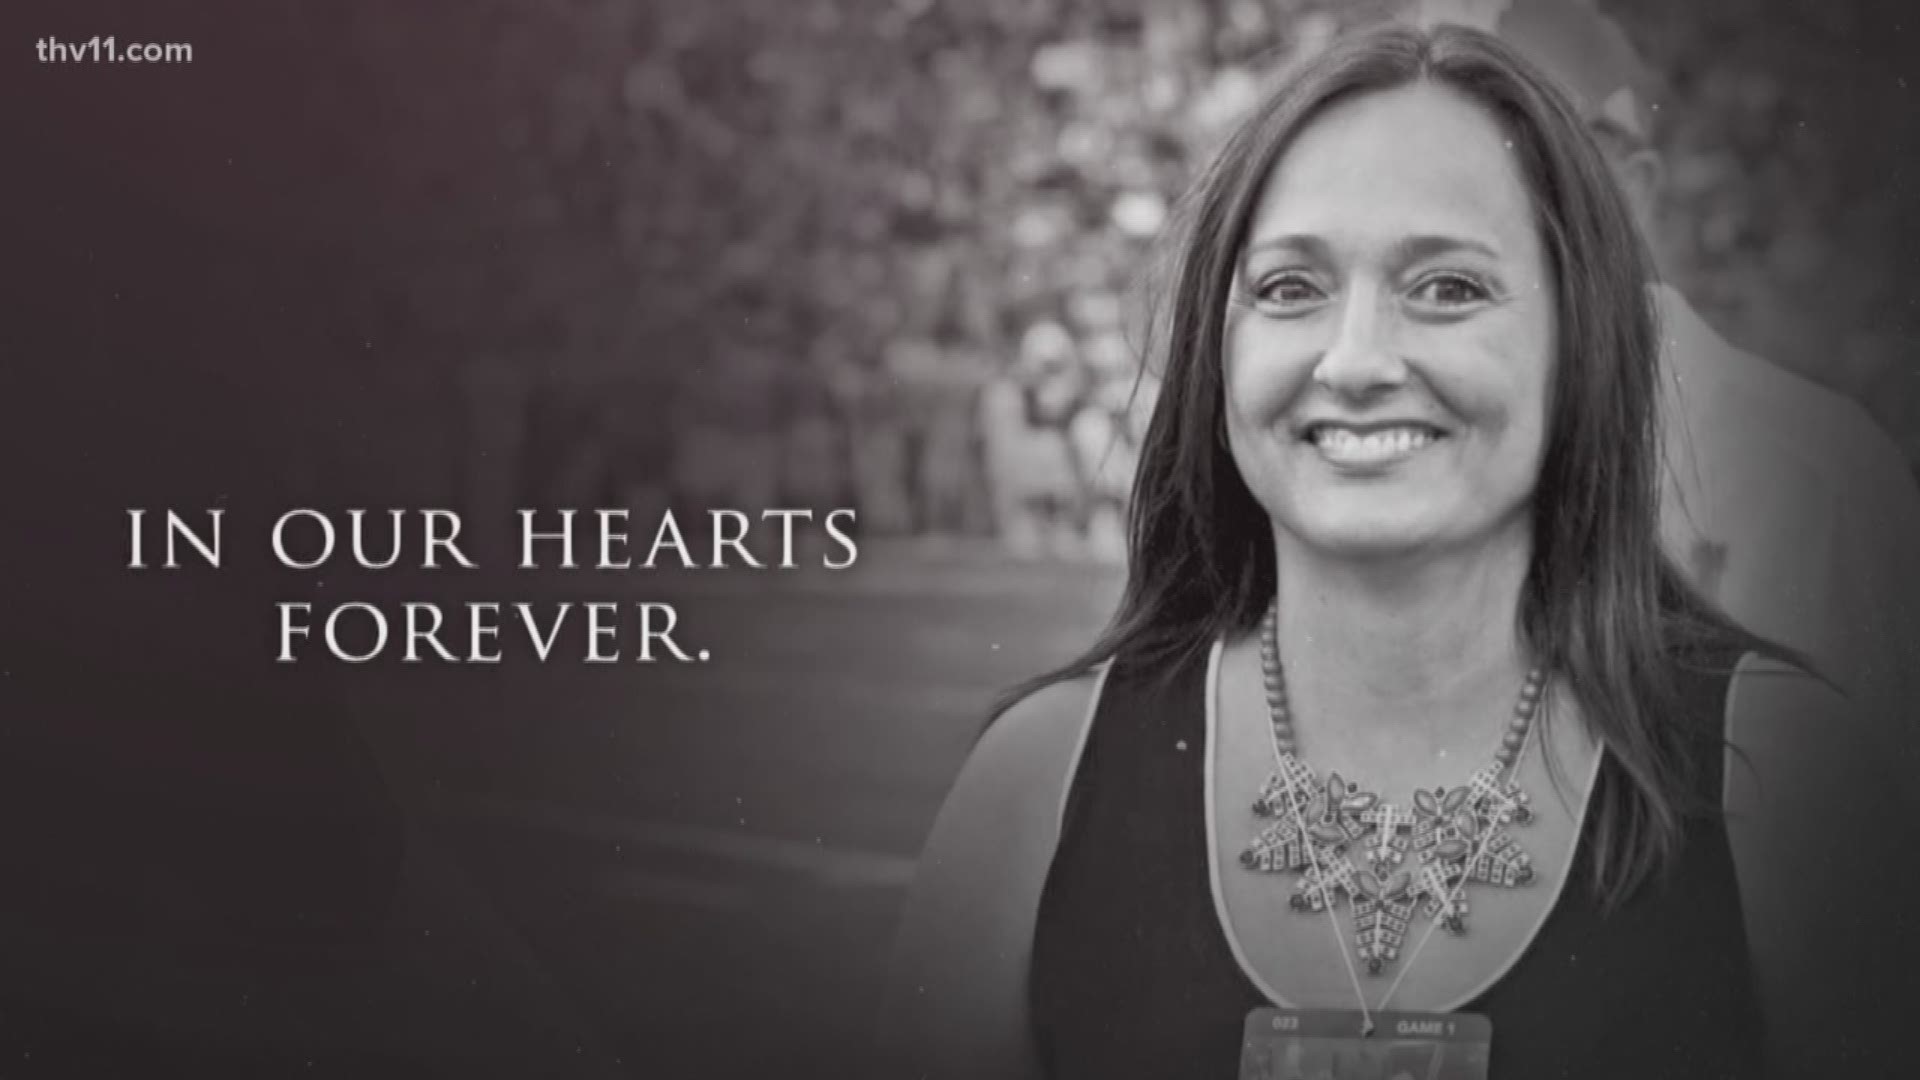 A-State community mourns Wendy Anderson